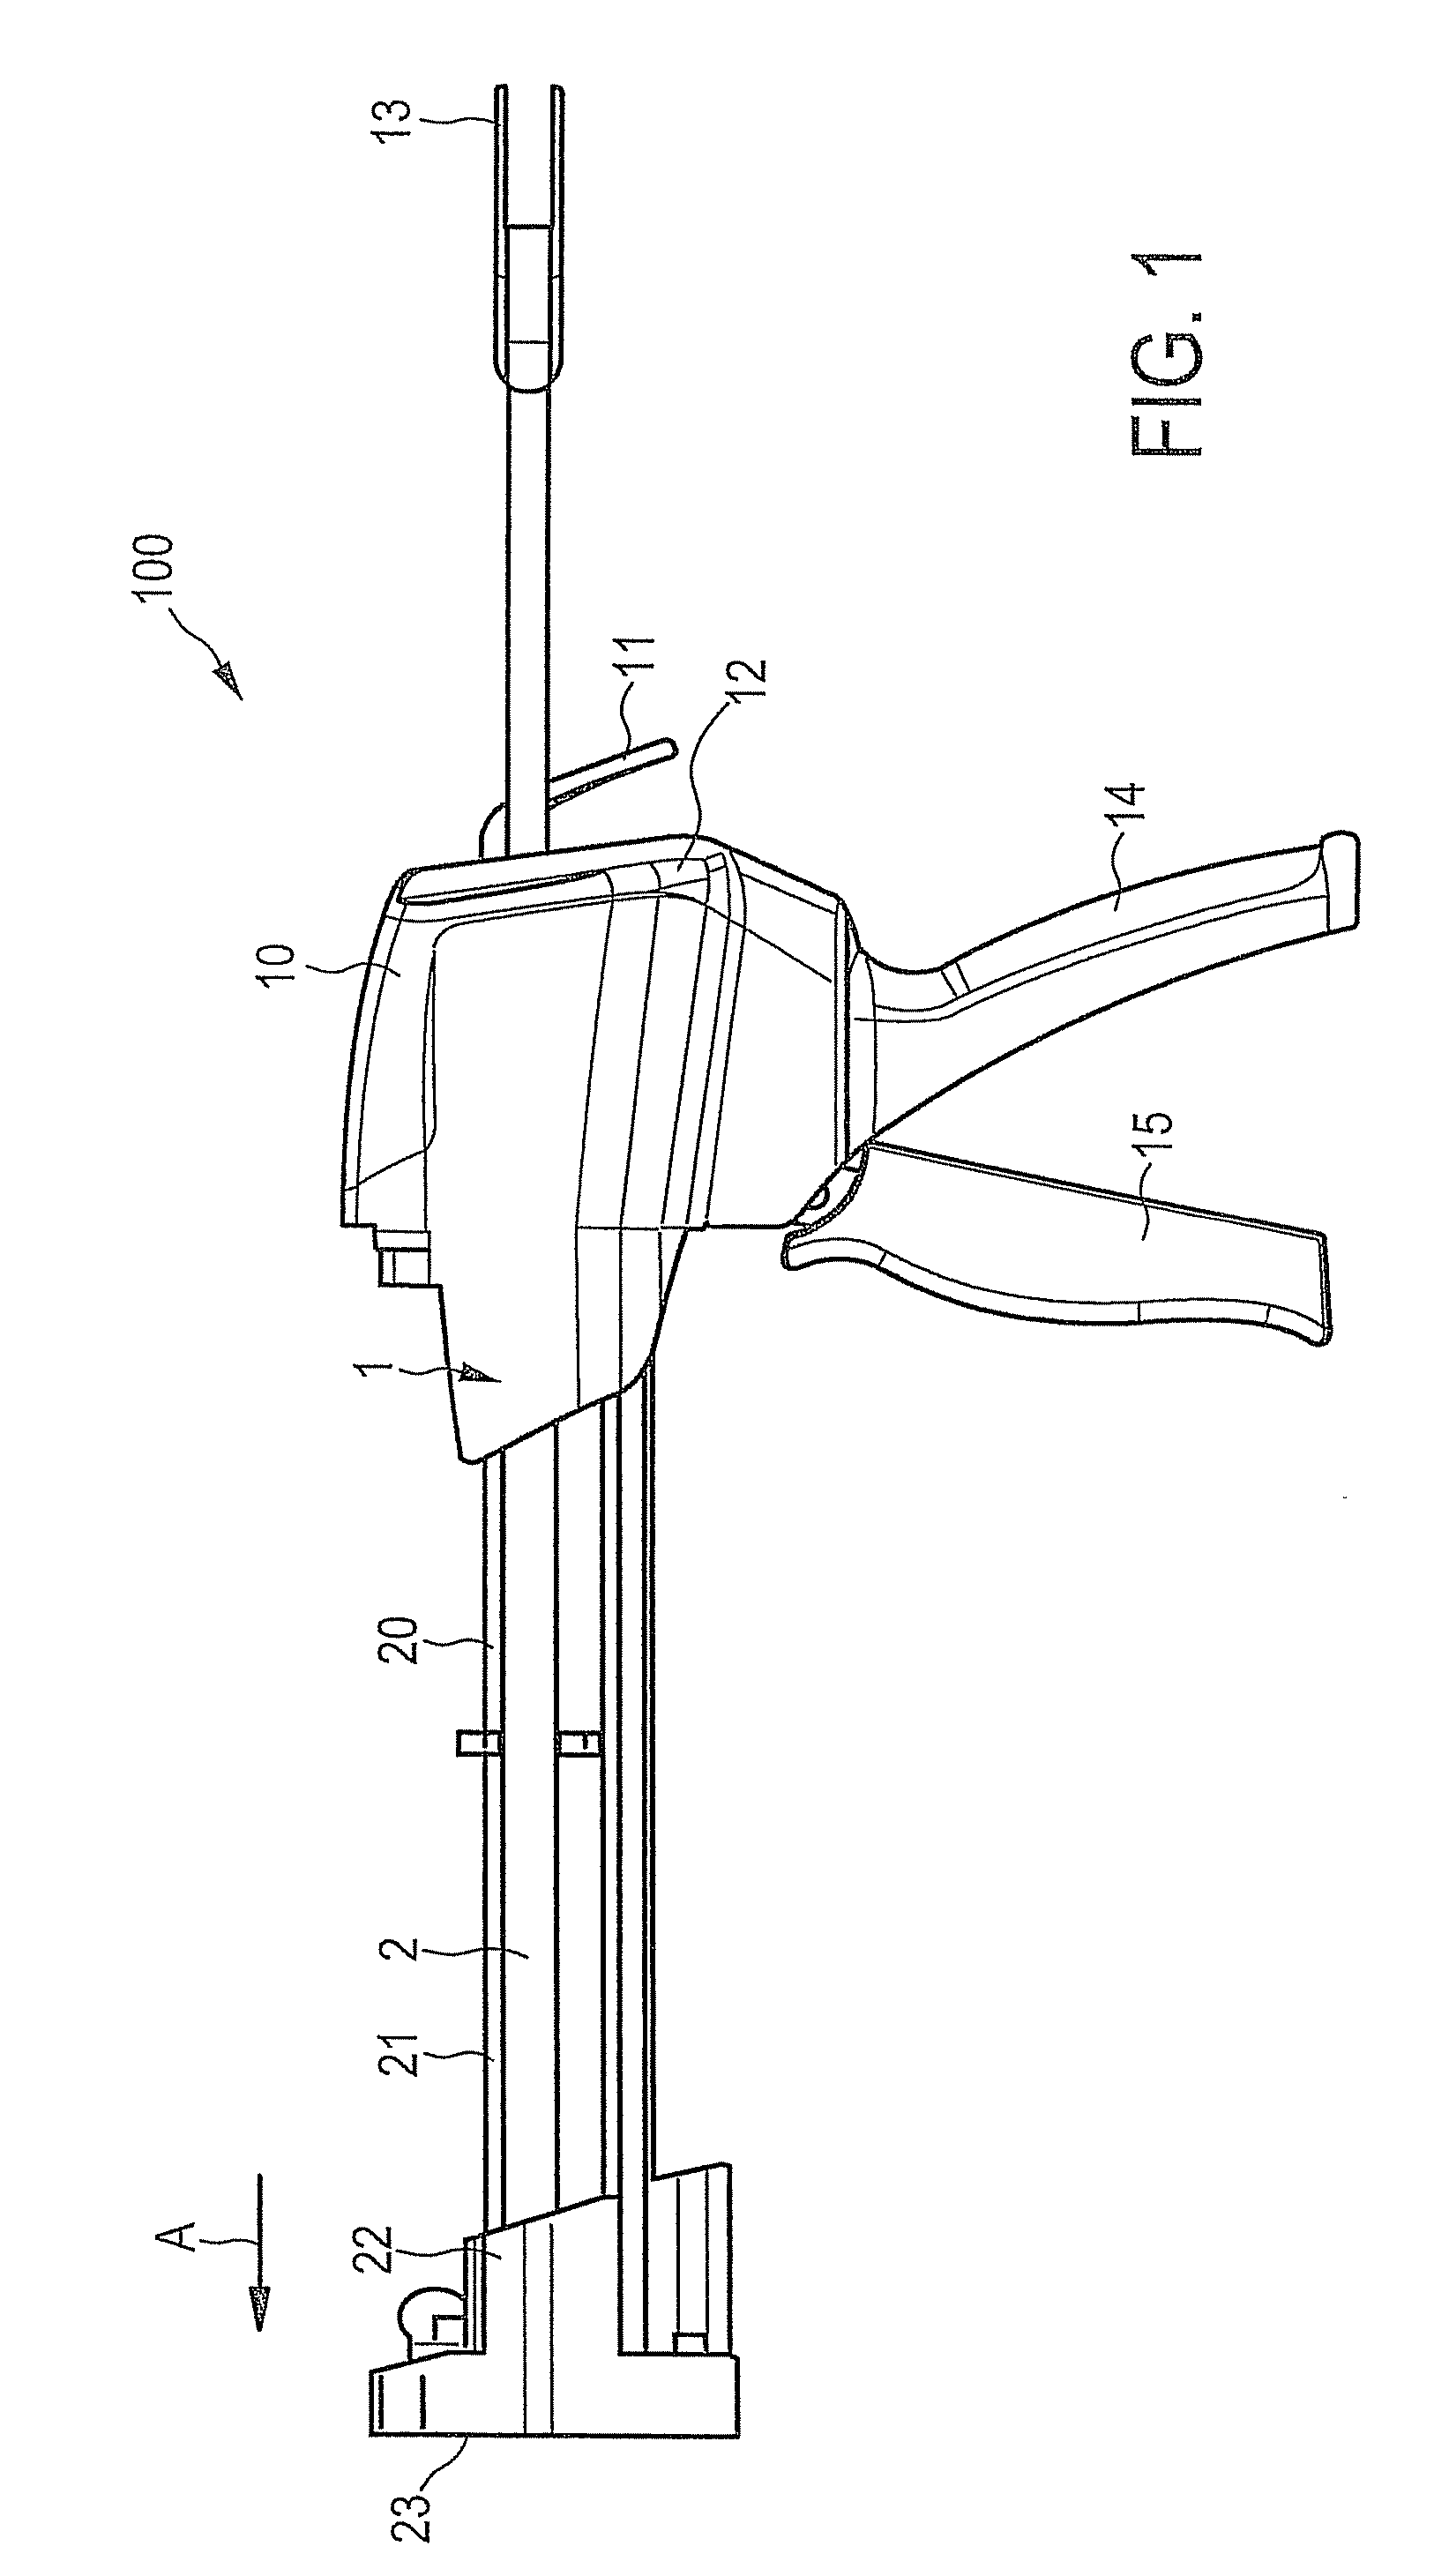 Extrusion device